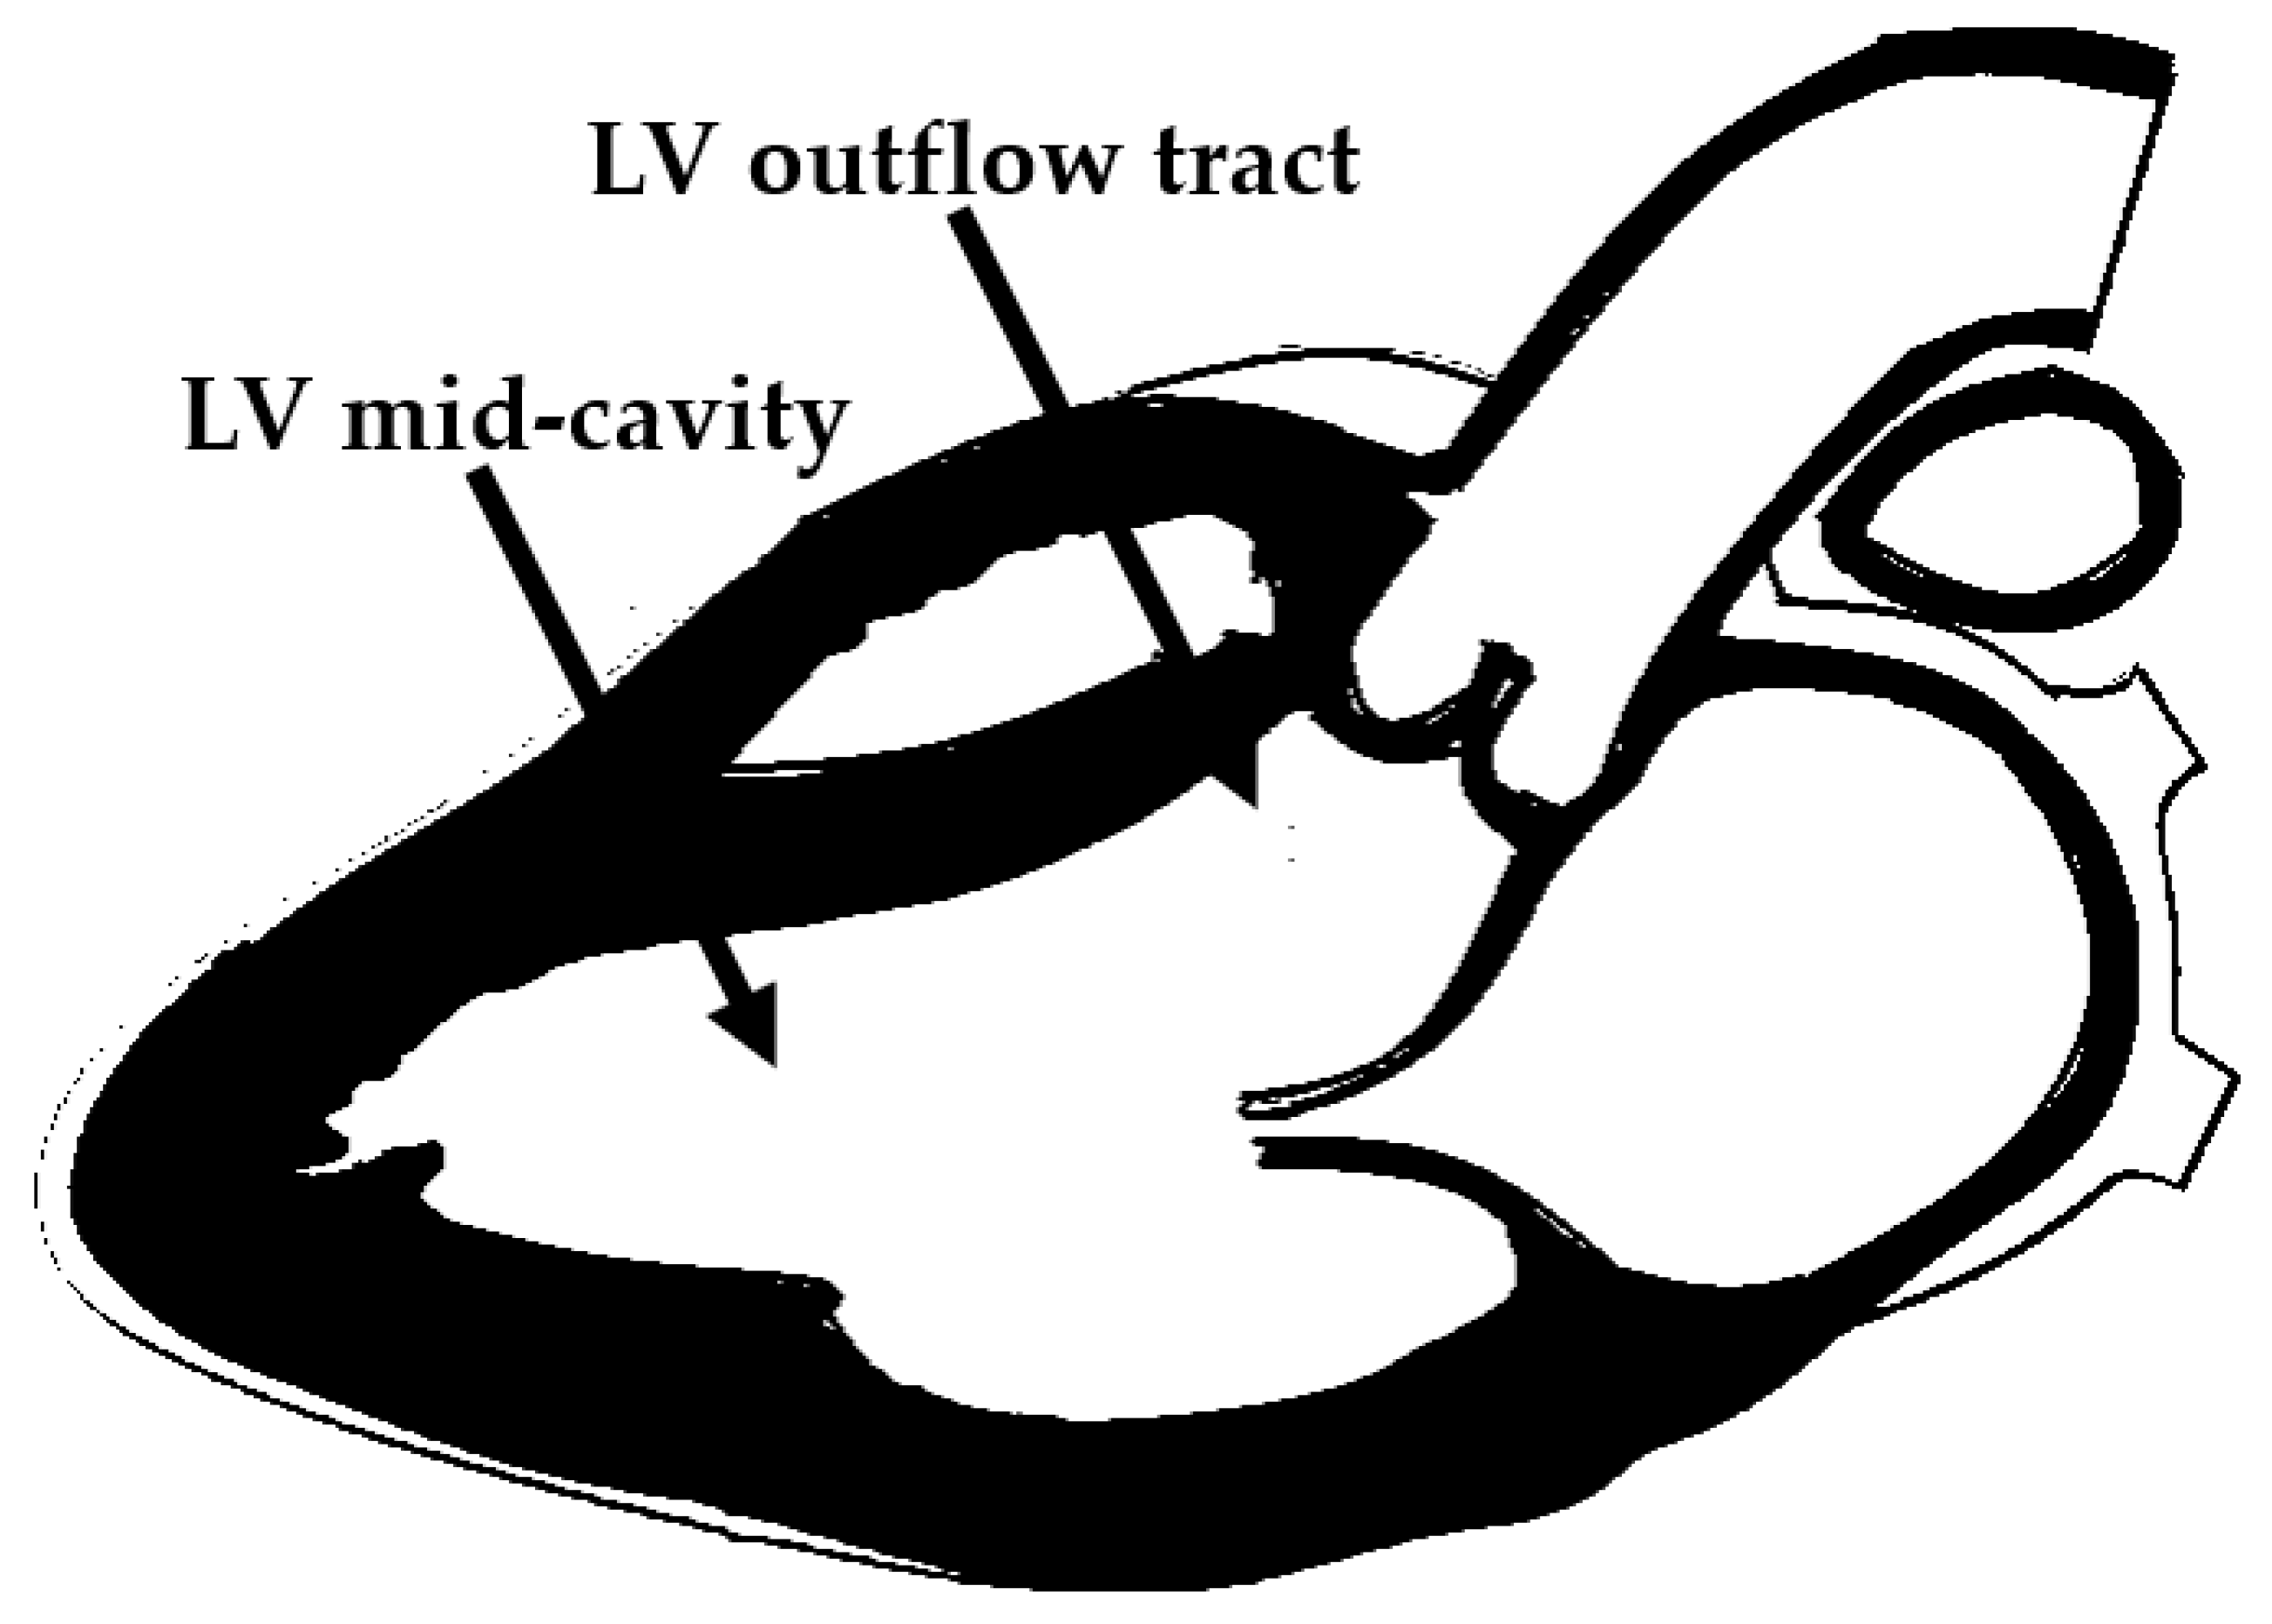 Measuring Left Ventricular Outflow Tract Signal Gradient in